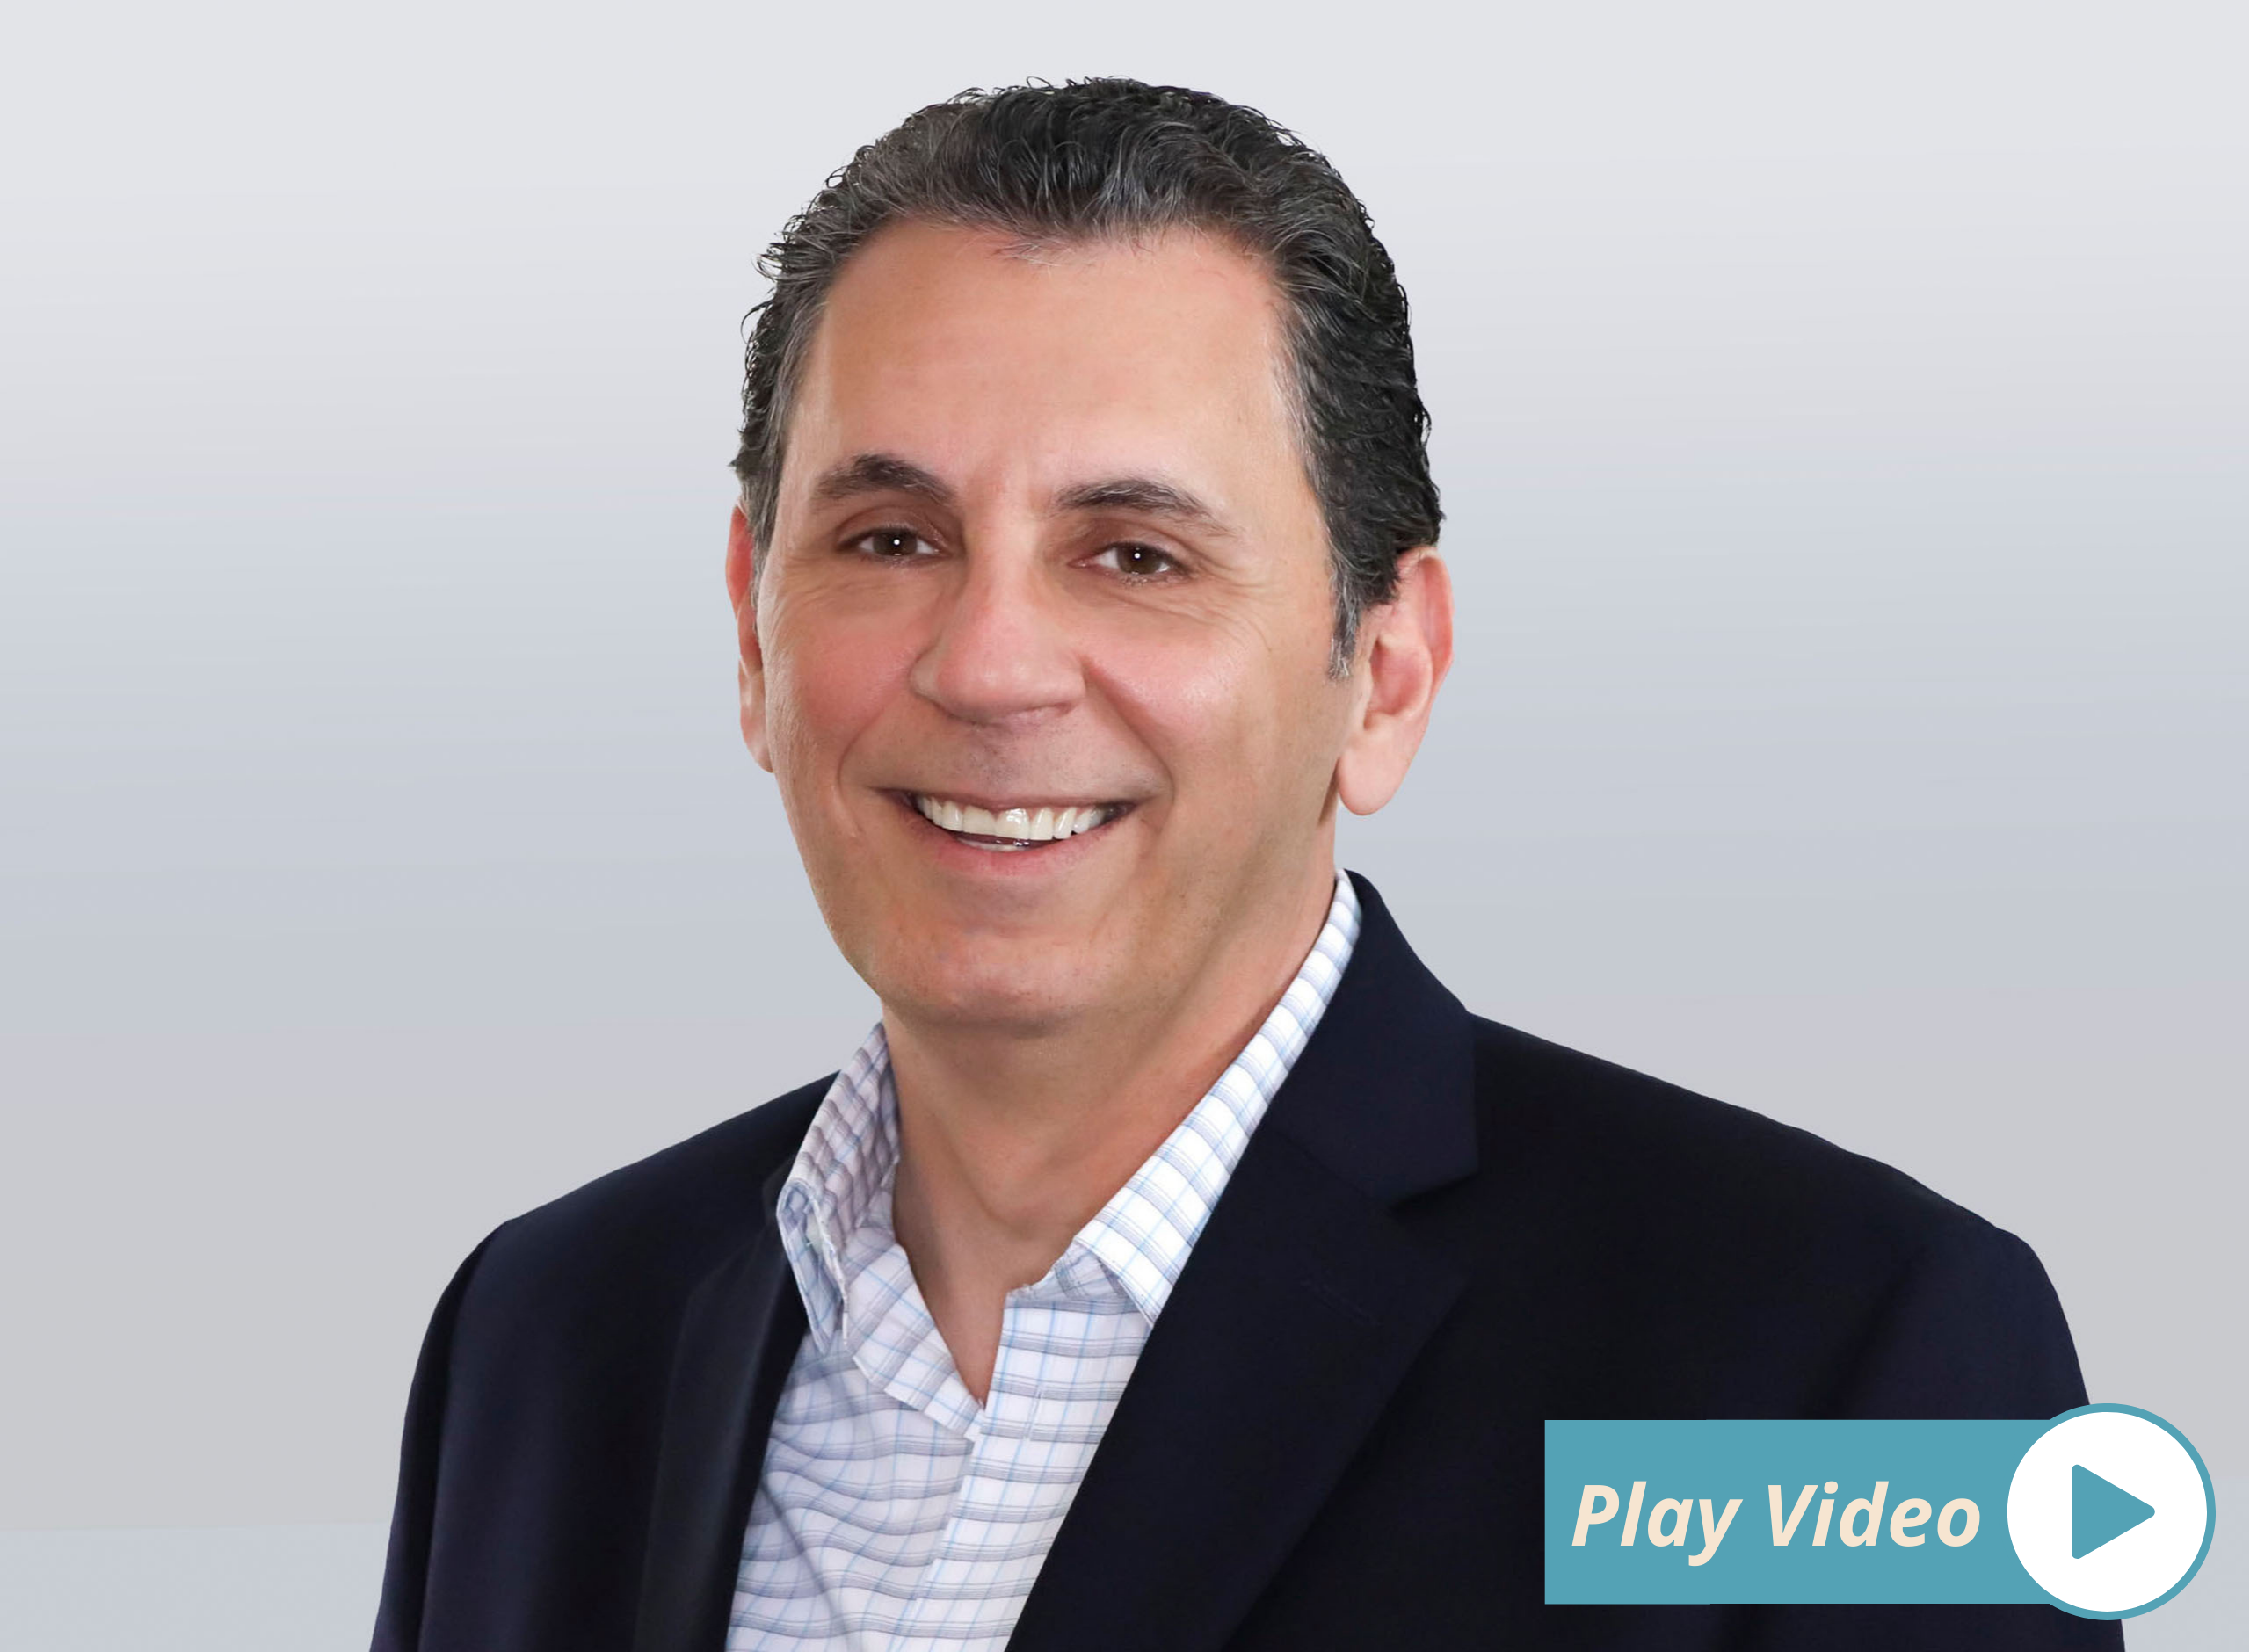 George Georghiou, Executive Vice President, Chief Financial Officer & Chief Information Officer. Click to play a video introduction.